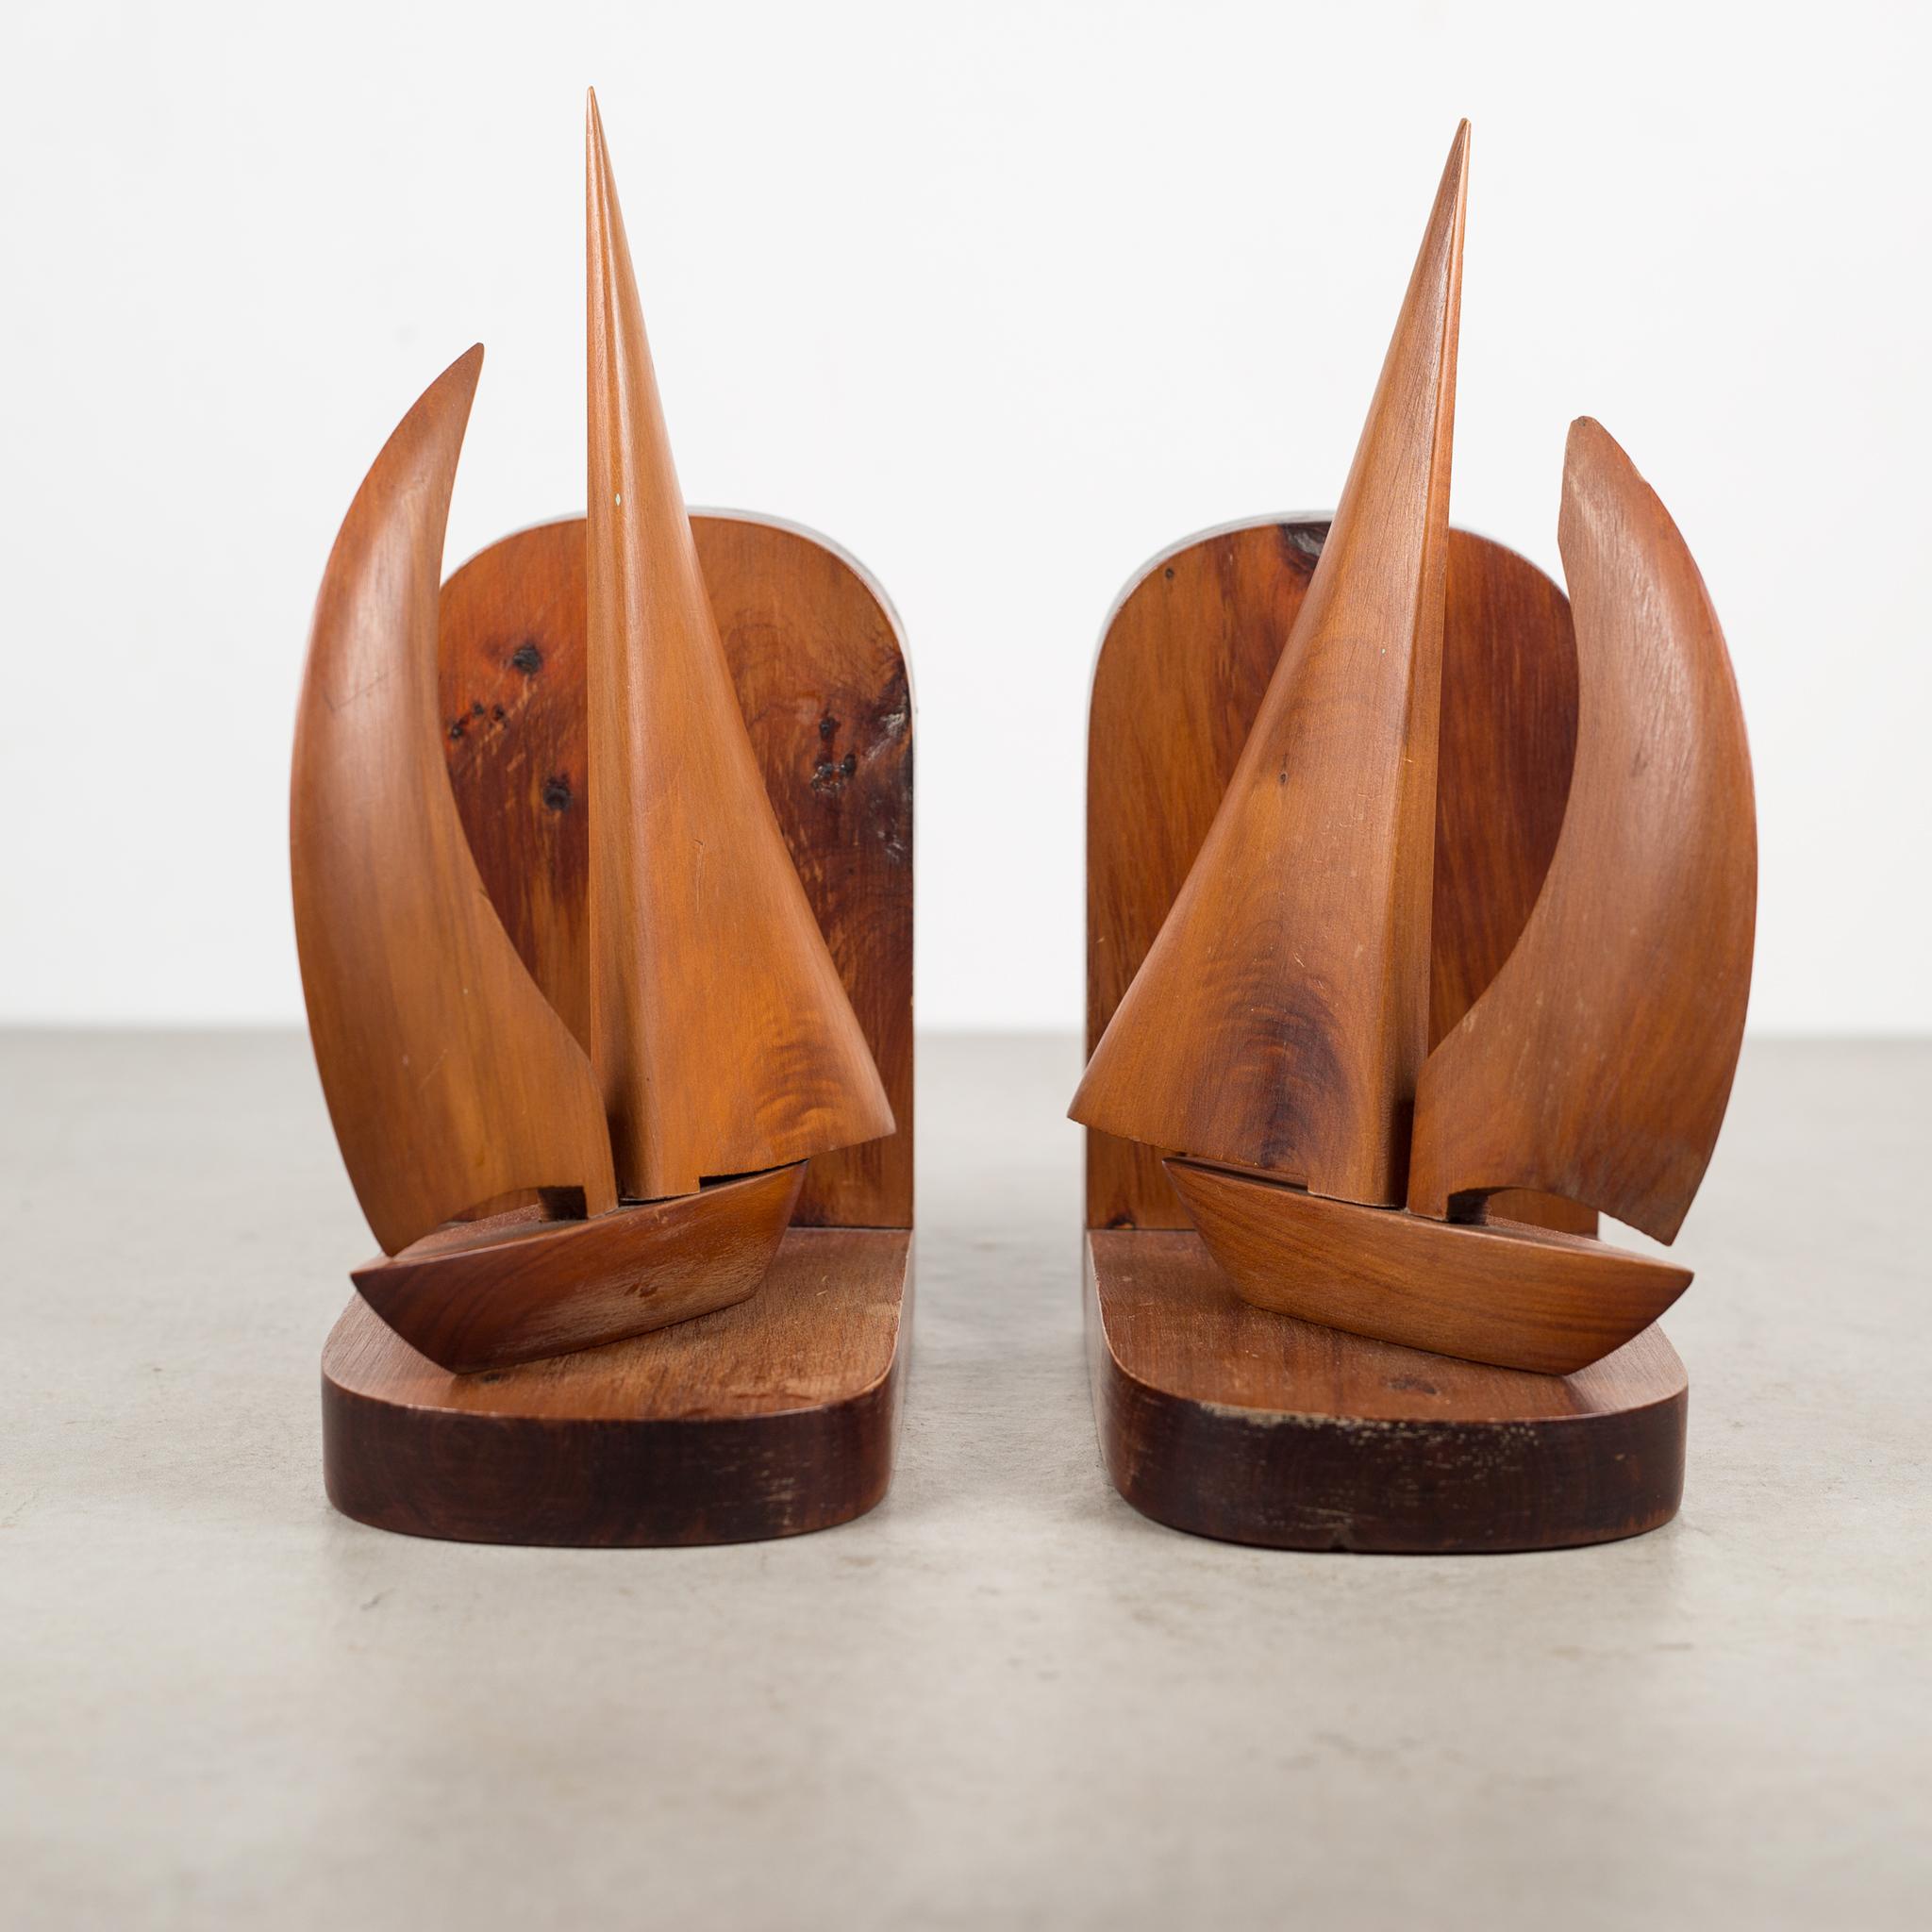 About

A pair of carved Cedar souvenir sailboat bookends from Bermuda. Signed on the bottom and given has a gift in 1965. Each sail has been fashioned to insert in the boat independently.

Creator unknown.
Date of manufacture circa